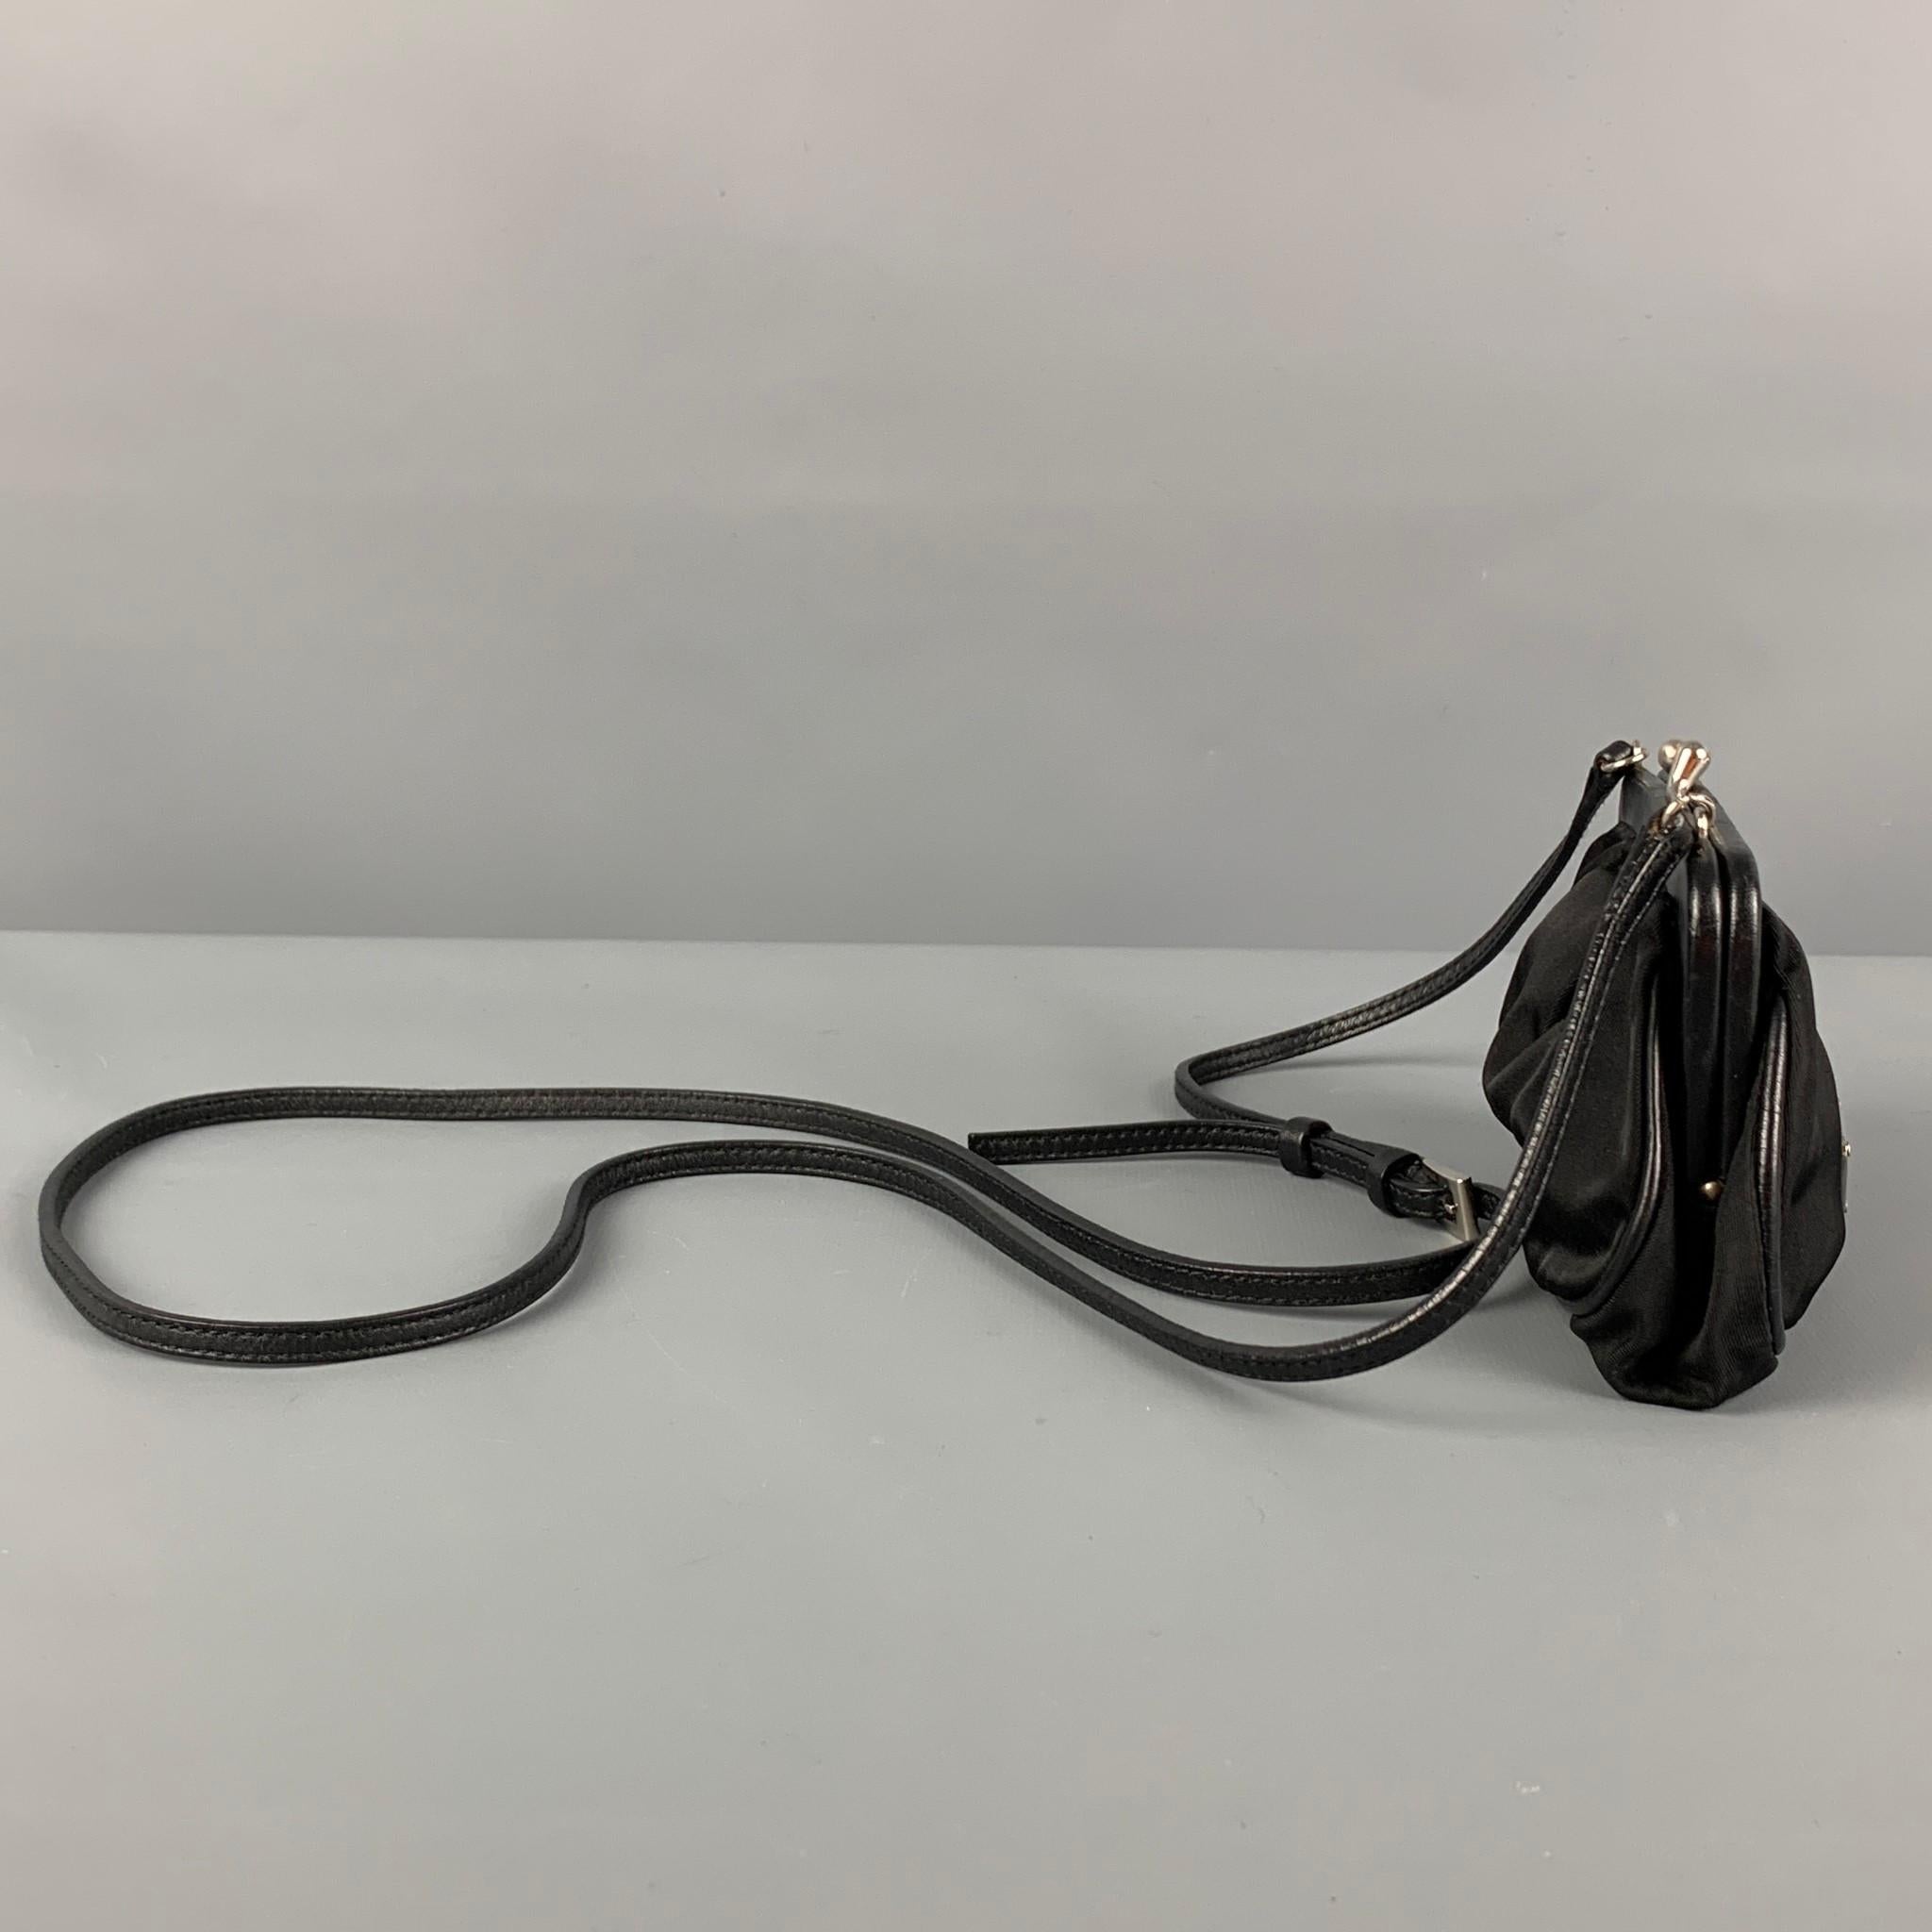 PRADA mini handbag comes in a black nylon featuring a adjustable crossbody strap, logo emblem detail, and a kiss-lock closure. Made in Italy. 

Very Good Pre-Owned Condition. Light wear at strap.

Measurements:

Length: 6 in.
Width: 1.5 in.
Height: